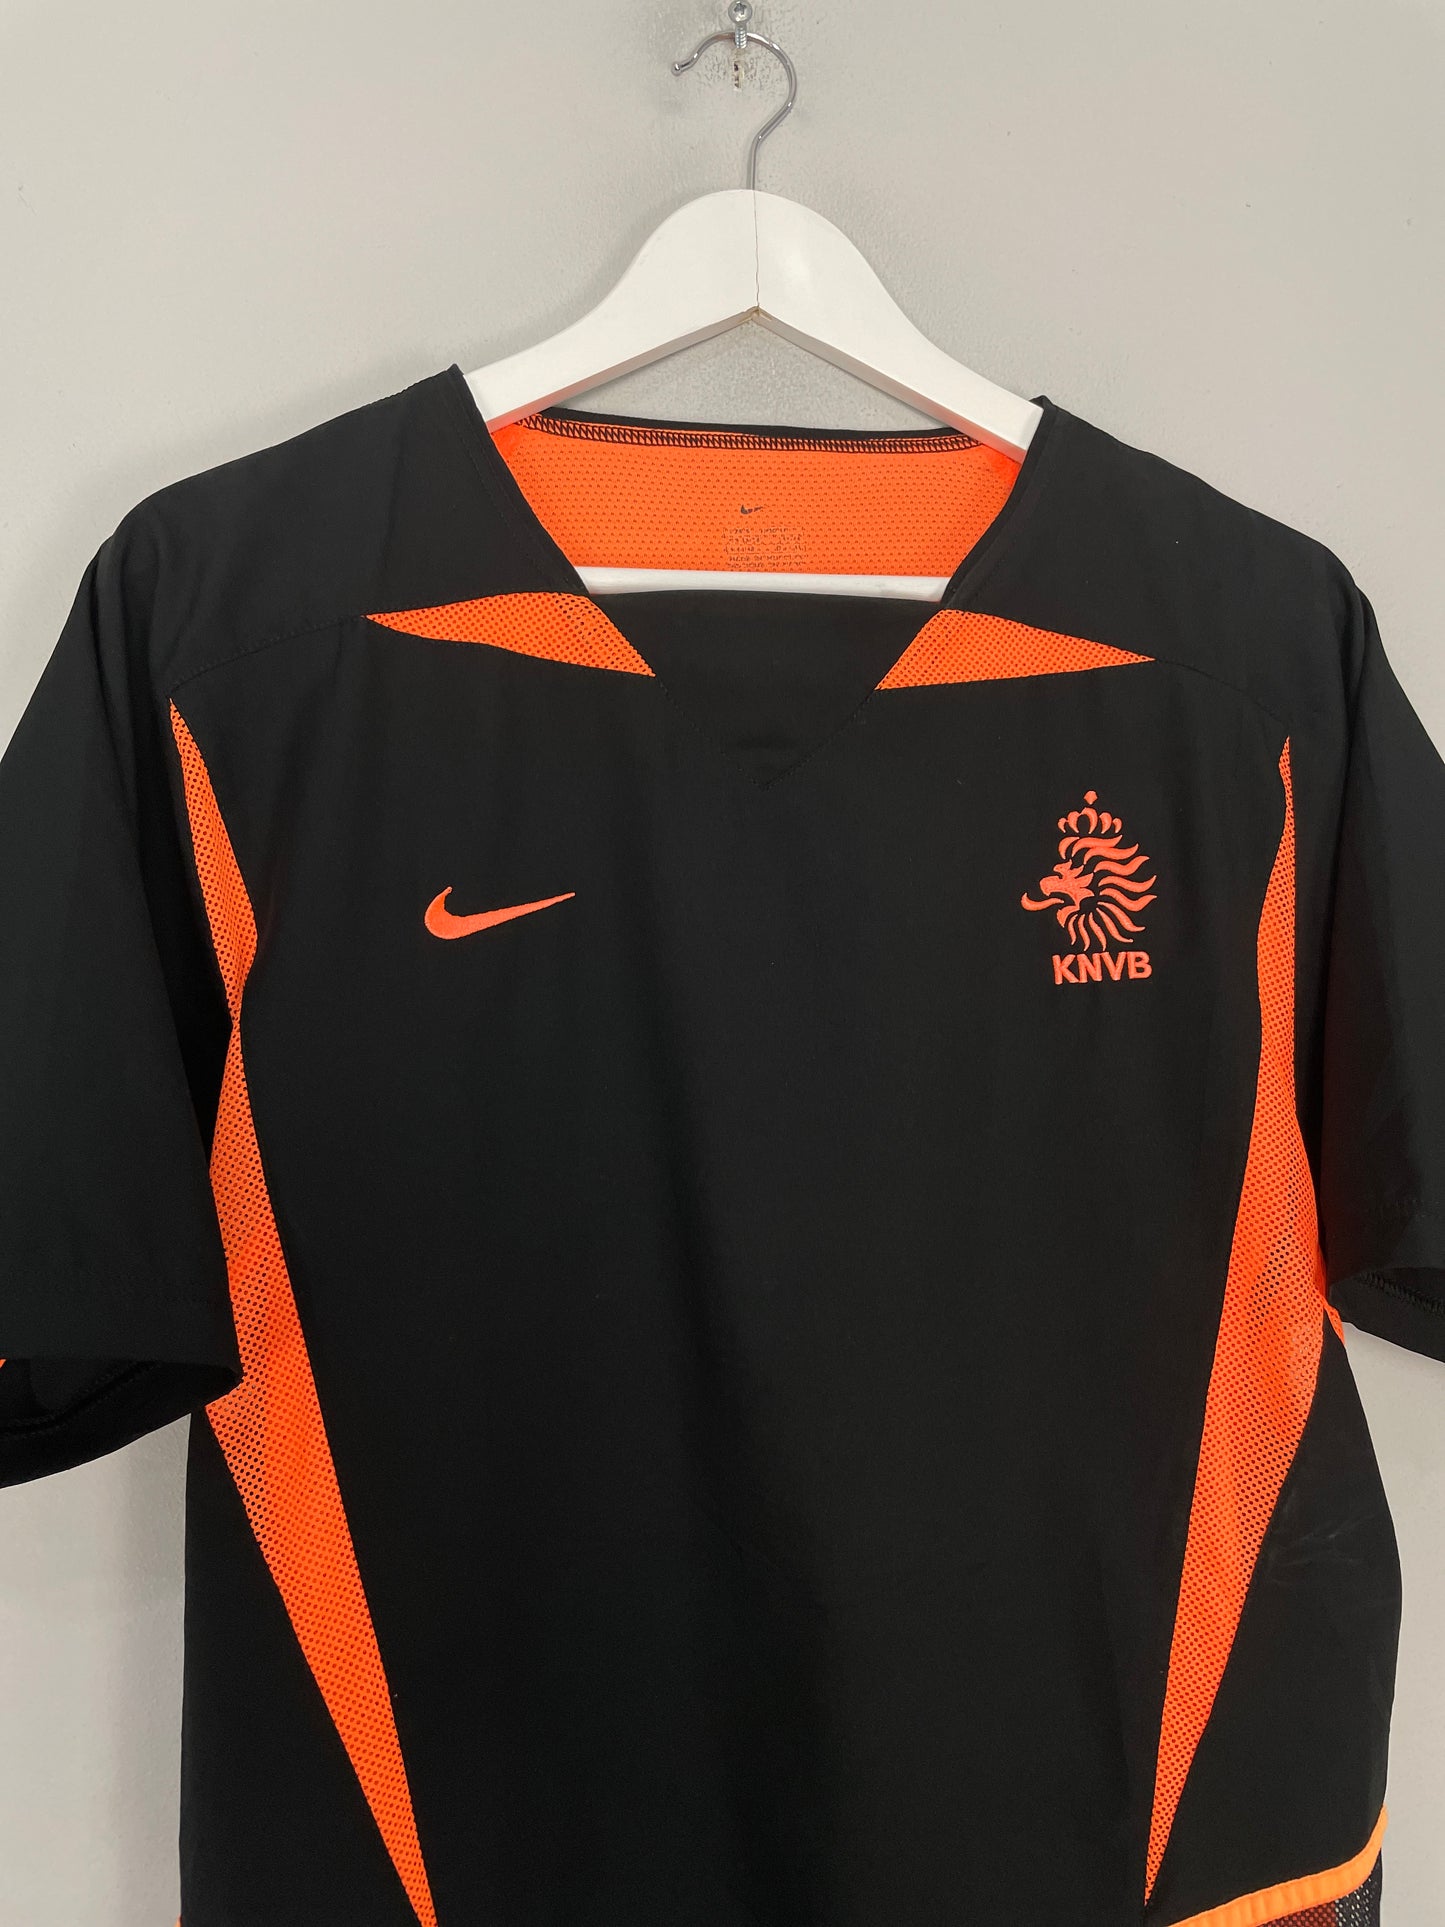 2002/04 NETHERLANDS *PLAYER ISSUE* AWAY SHIRT (S) NIKE